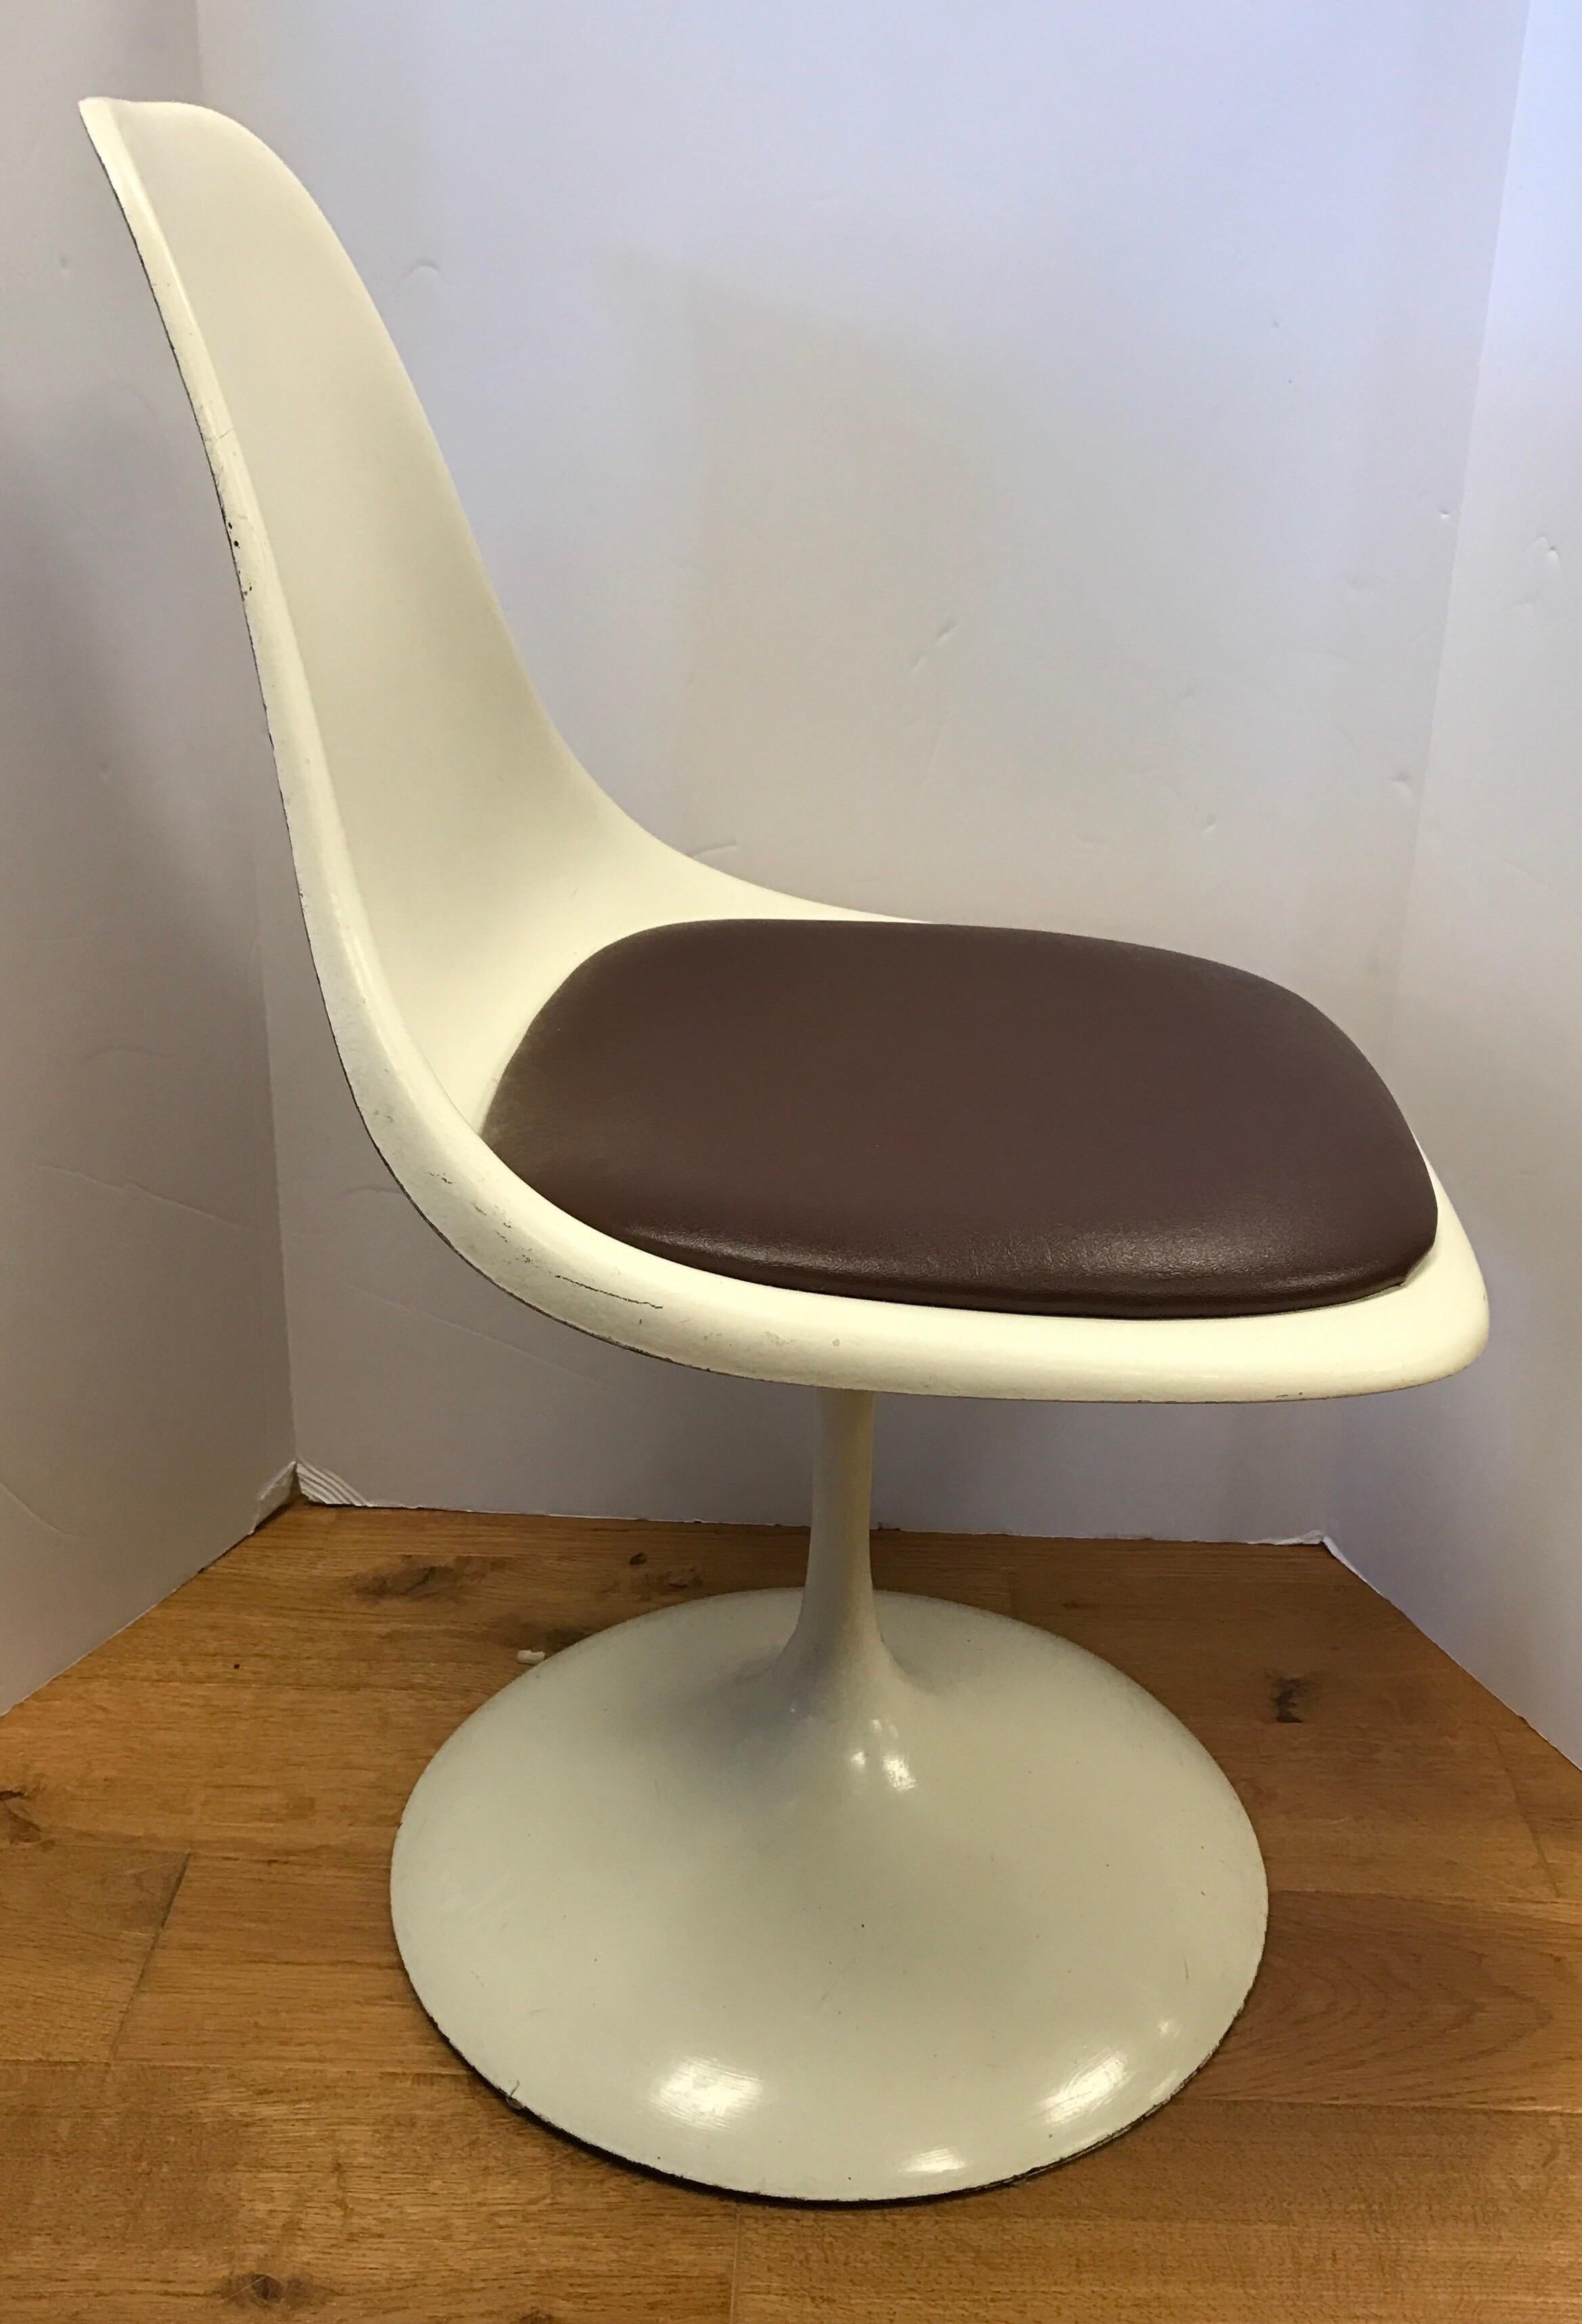 Rare set of white tulip dining chairs with semi gloss finish and brown vinyl seat. What makes them rare is the scale, they are kids size.